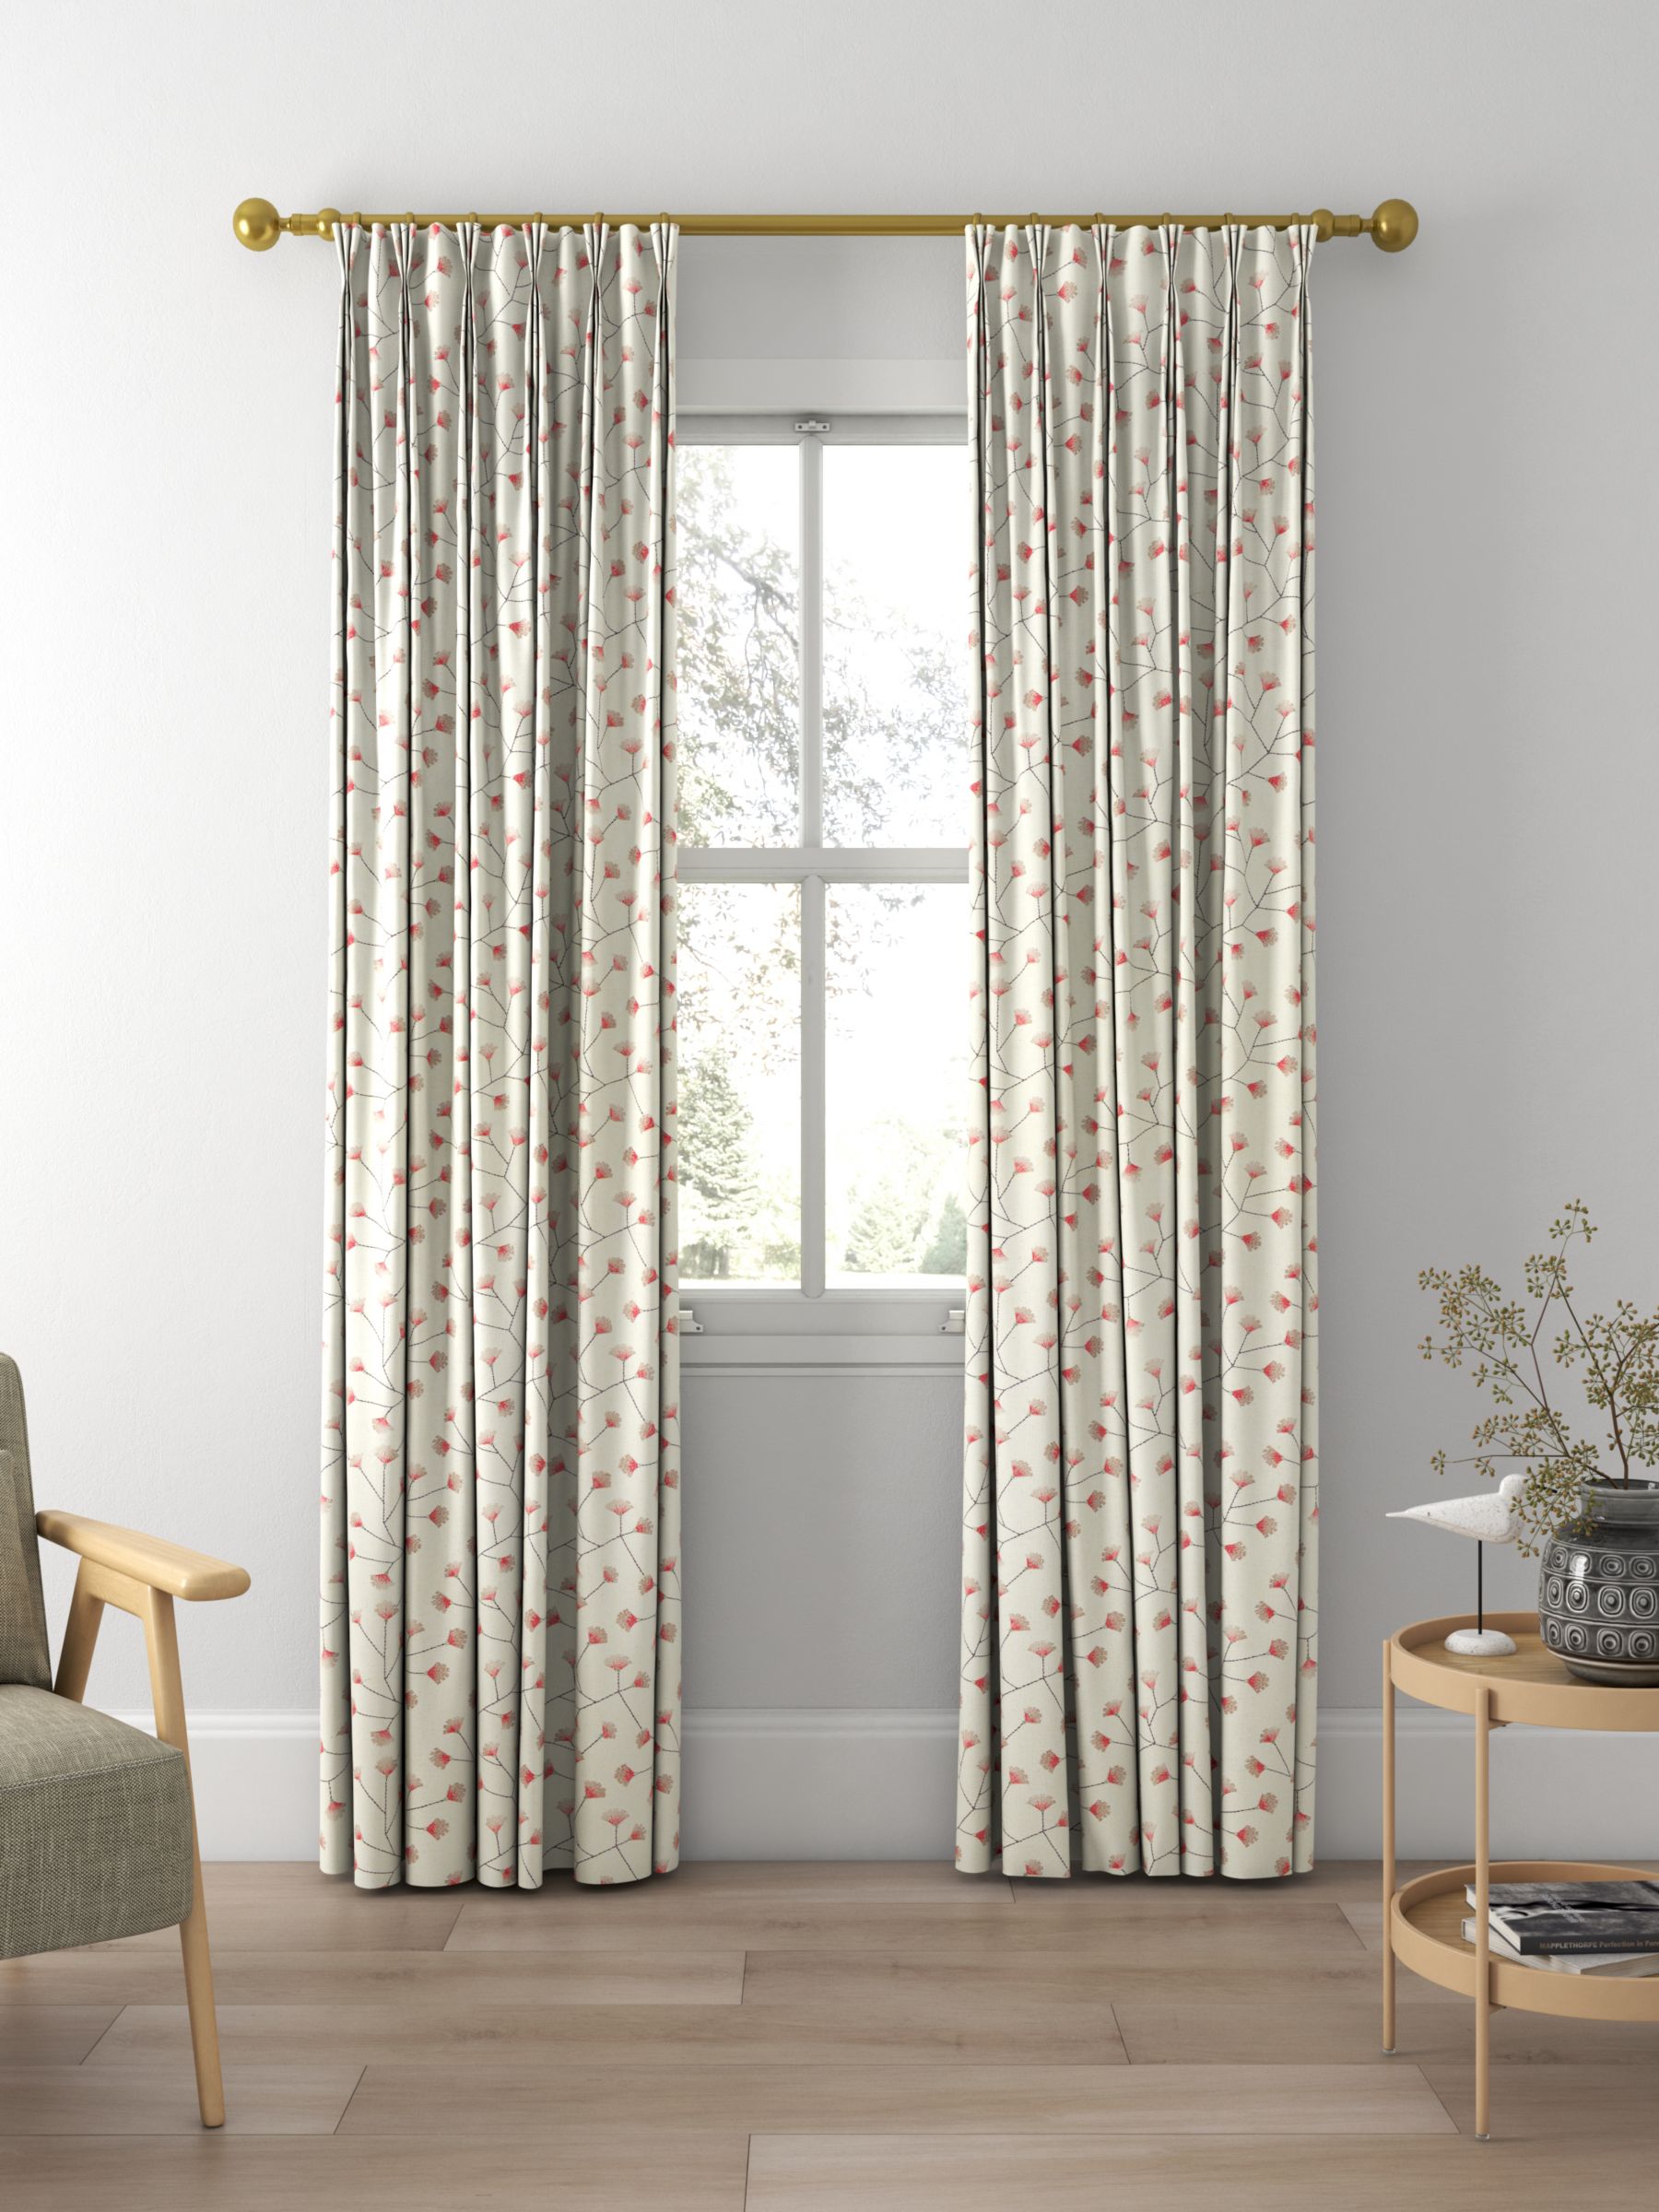 Sanderson Gingko Trail Made to Measure Curtains, Coral/Celadon